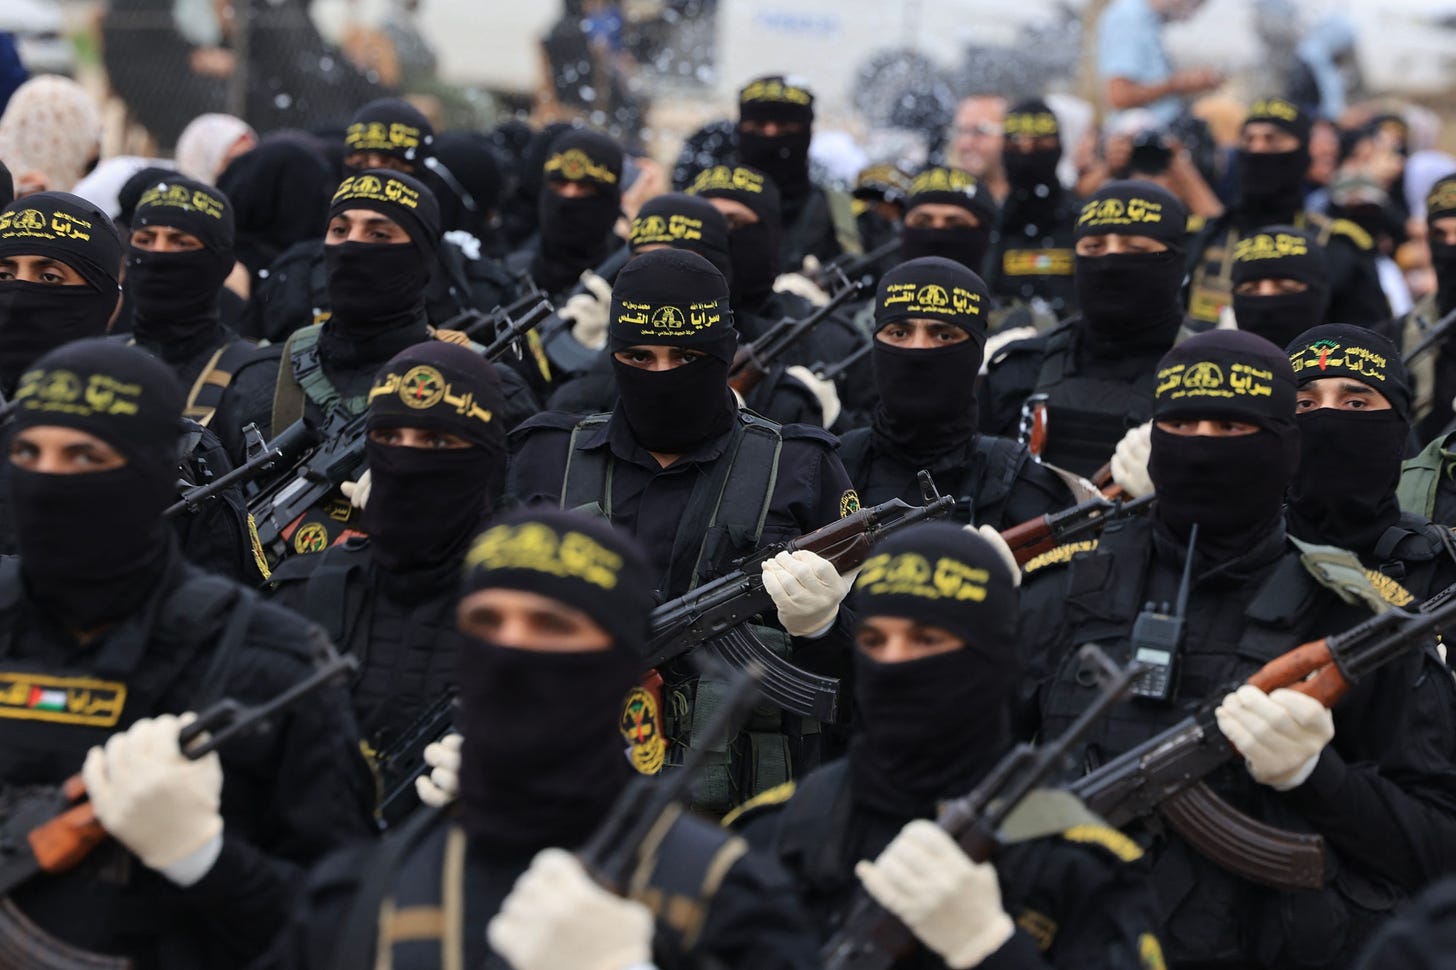 Islamic Jihad terrorists on parade in Gaza City on 4 October, about a week before the Hamas attack on Israel. Photograph by Mahmud Hams/AFP/Getty Images.